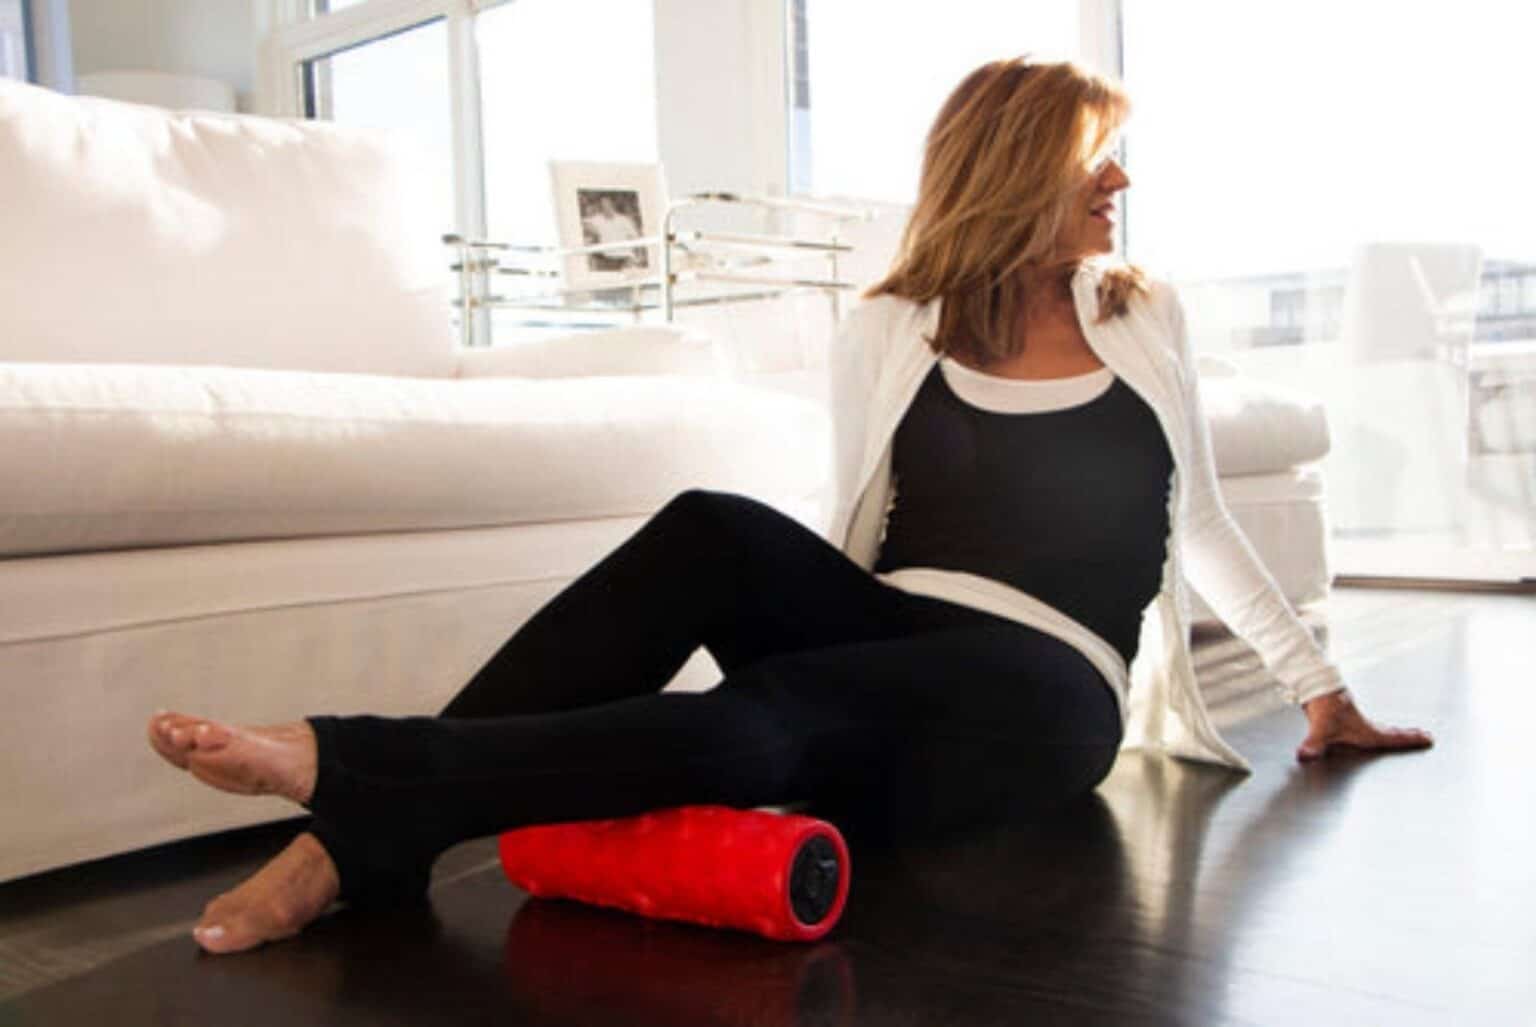 The Power Plate roller gives targeted vibration therapy to aching muscles.